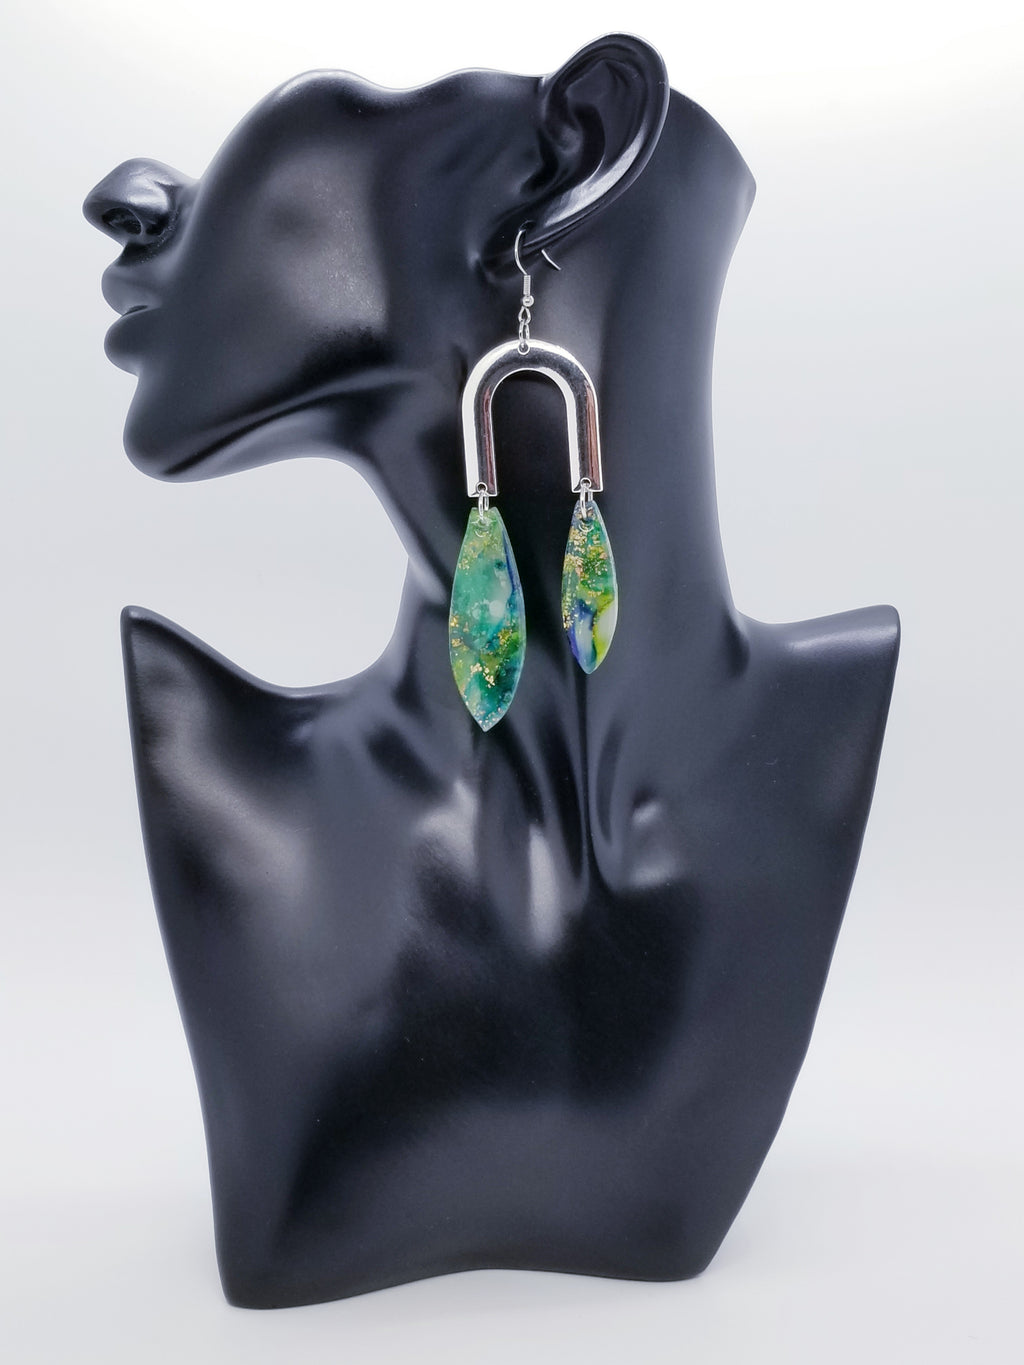 Length: 4 inches | Weight: 0.7 ounces  Distinctly You! The earrings are handmade using green and gold swirl resin design, silver u-shaped charms, and hypoallergenic hooks with back closures. 